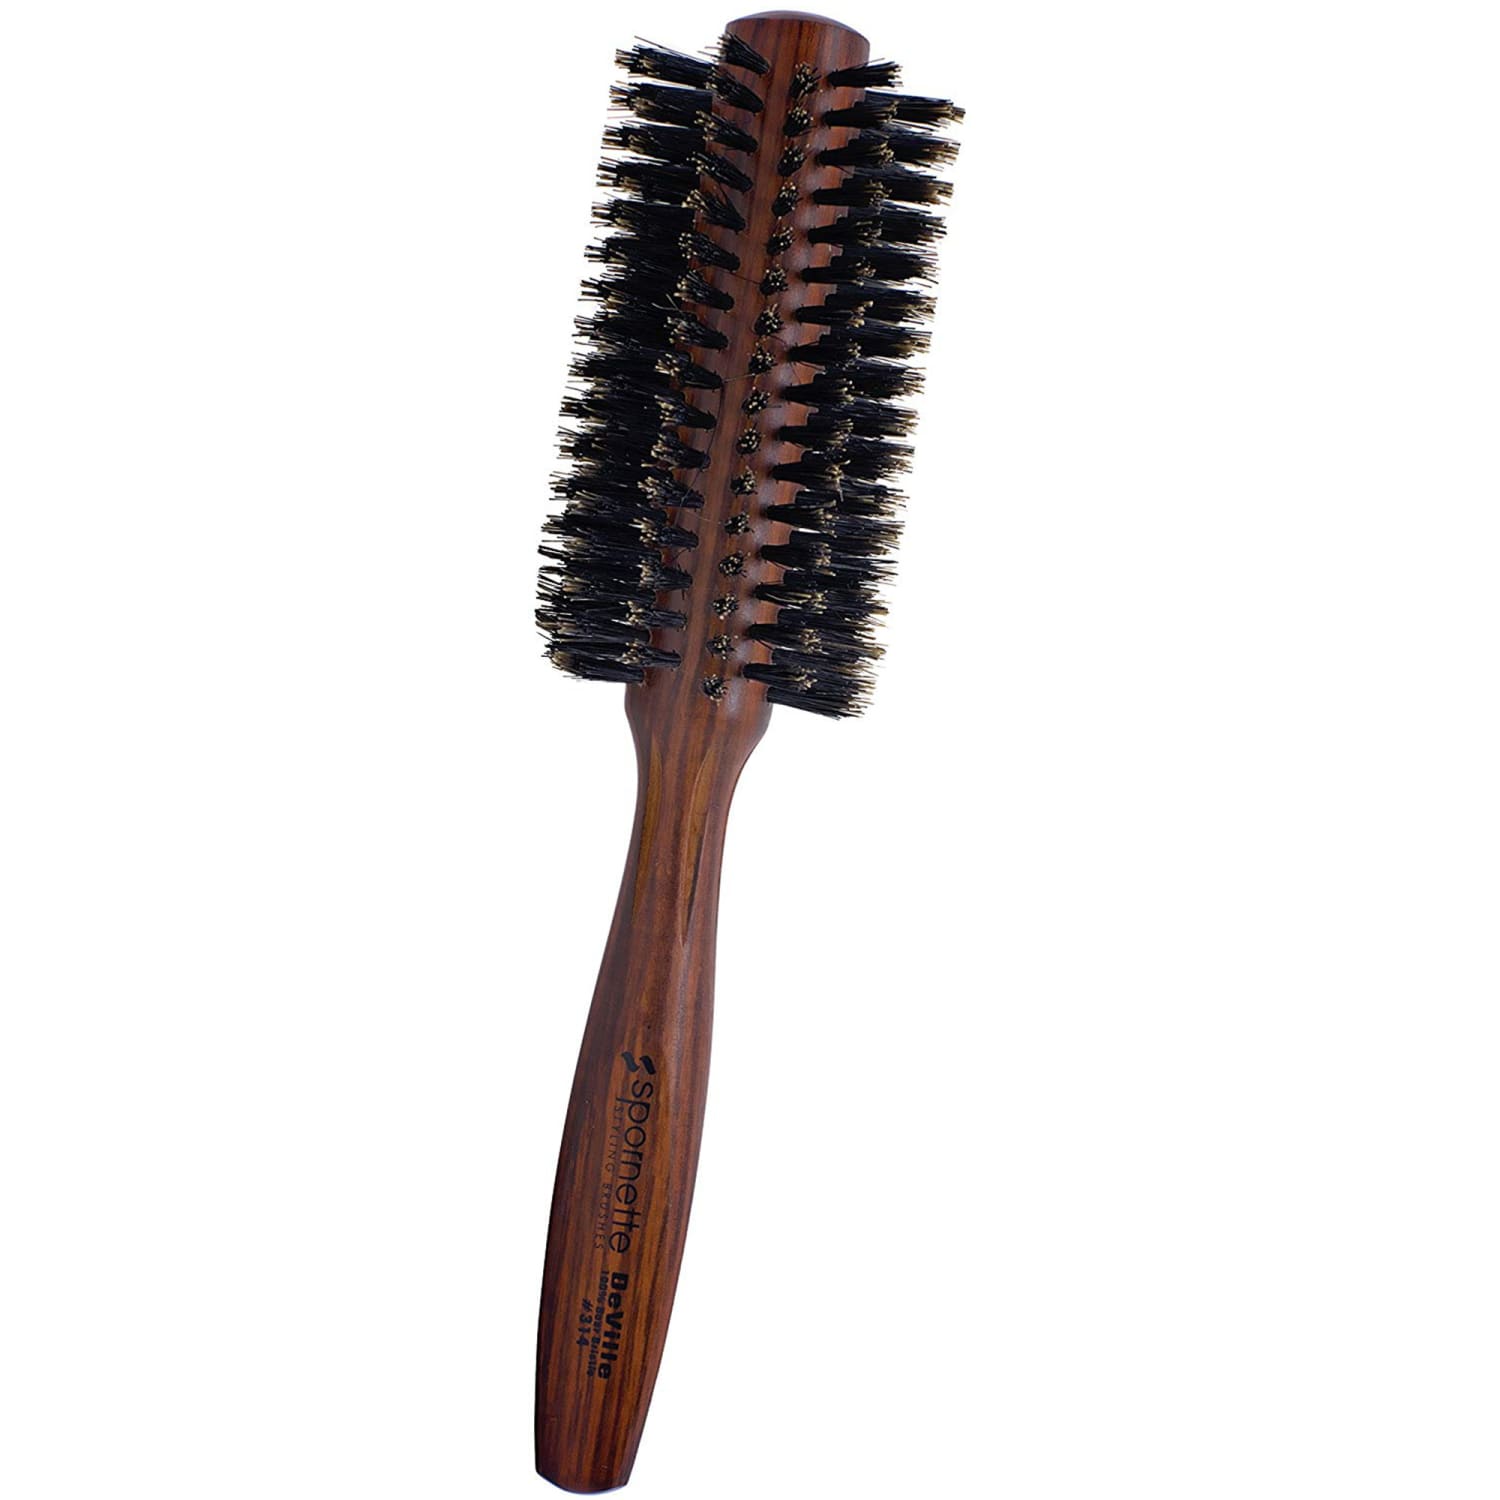 The Best Hairbrushes For Each Hair Type